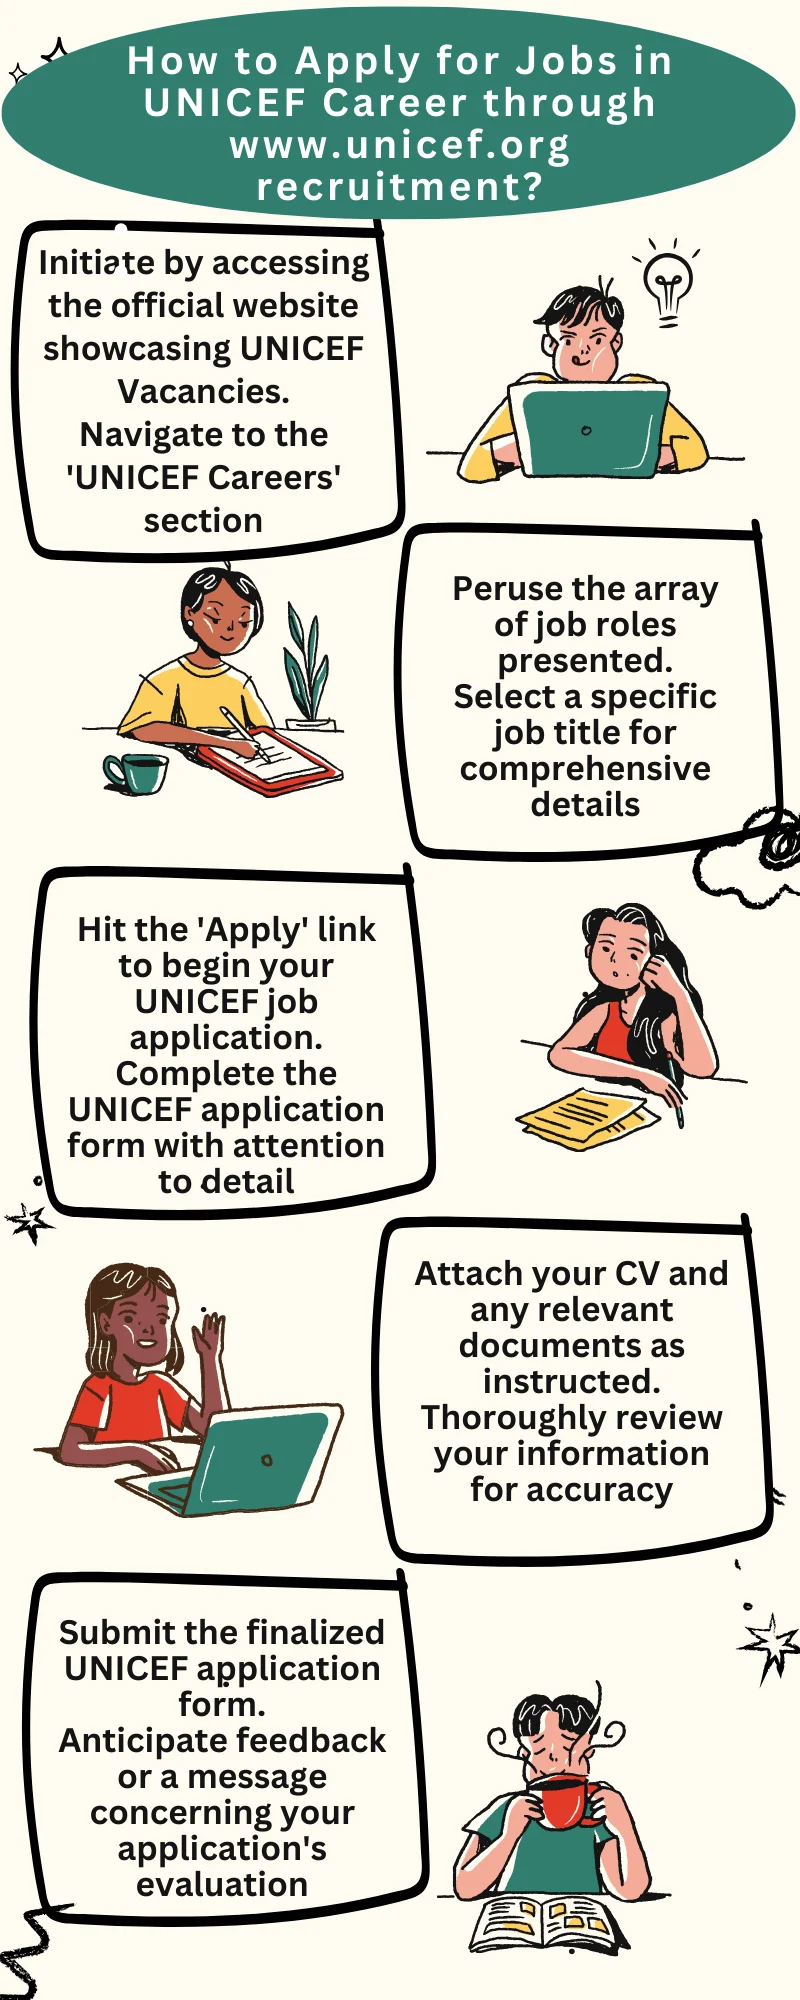 How to Apply for Jobs in UNICEF Career through www.unicef.org recruitment?